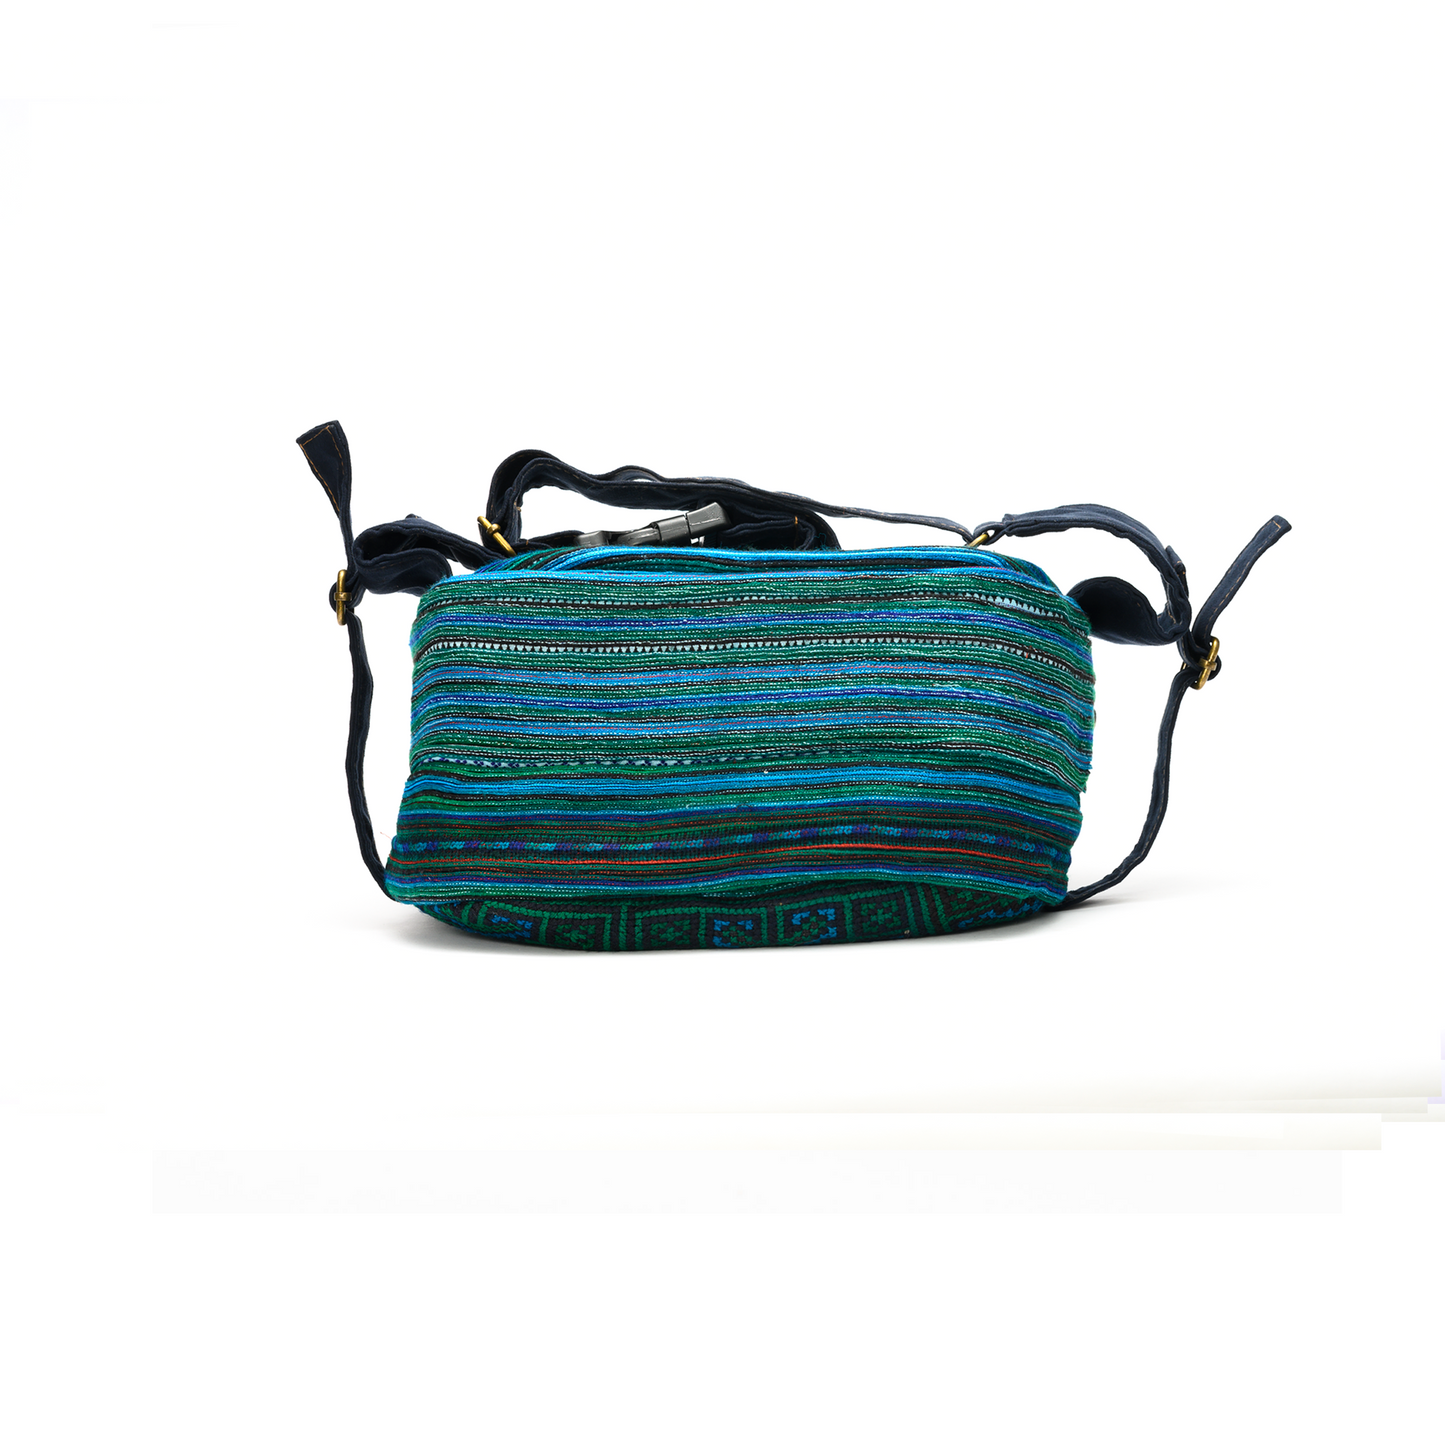 Green Waist bag, dark blue strap, embroidery and faux leather